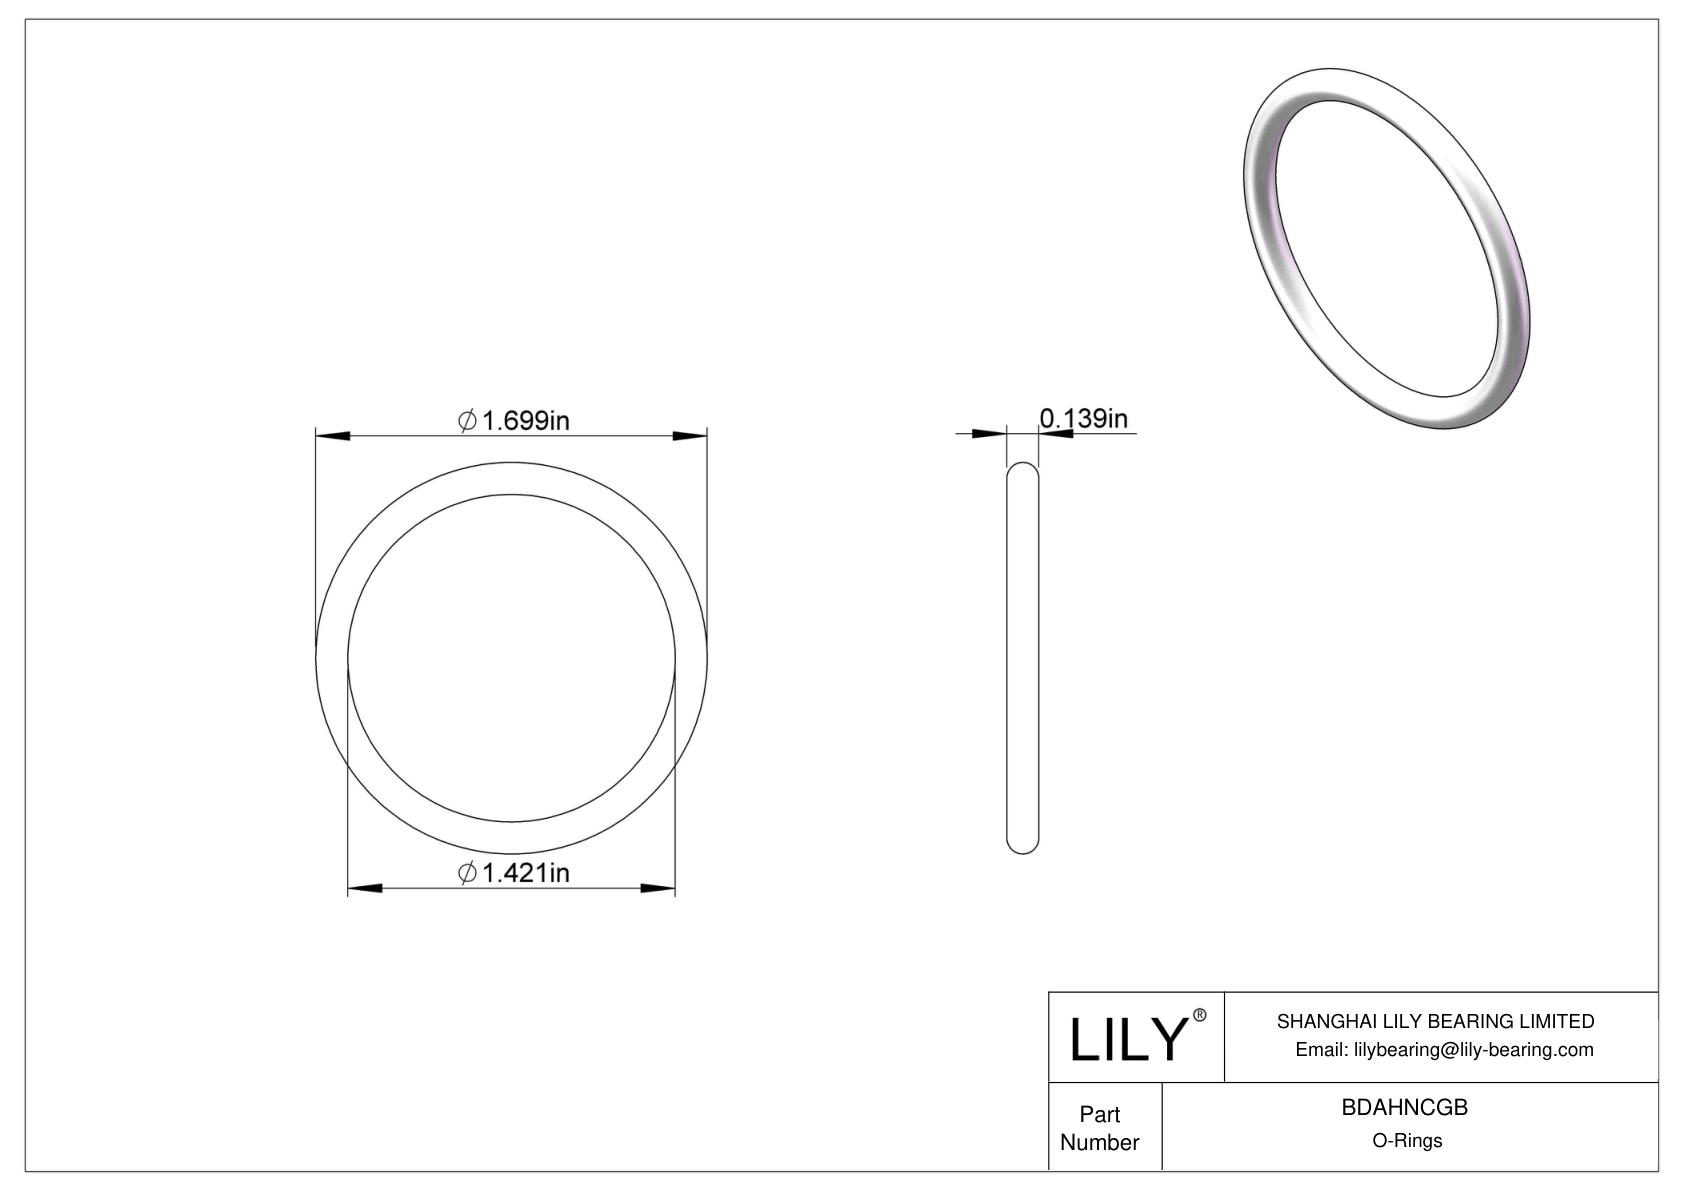 BDAHNCGB Oil Resistant O-Rings Round cad drawing